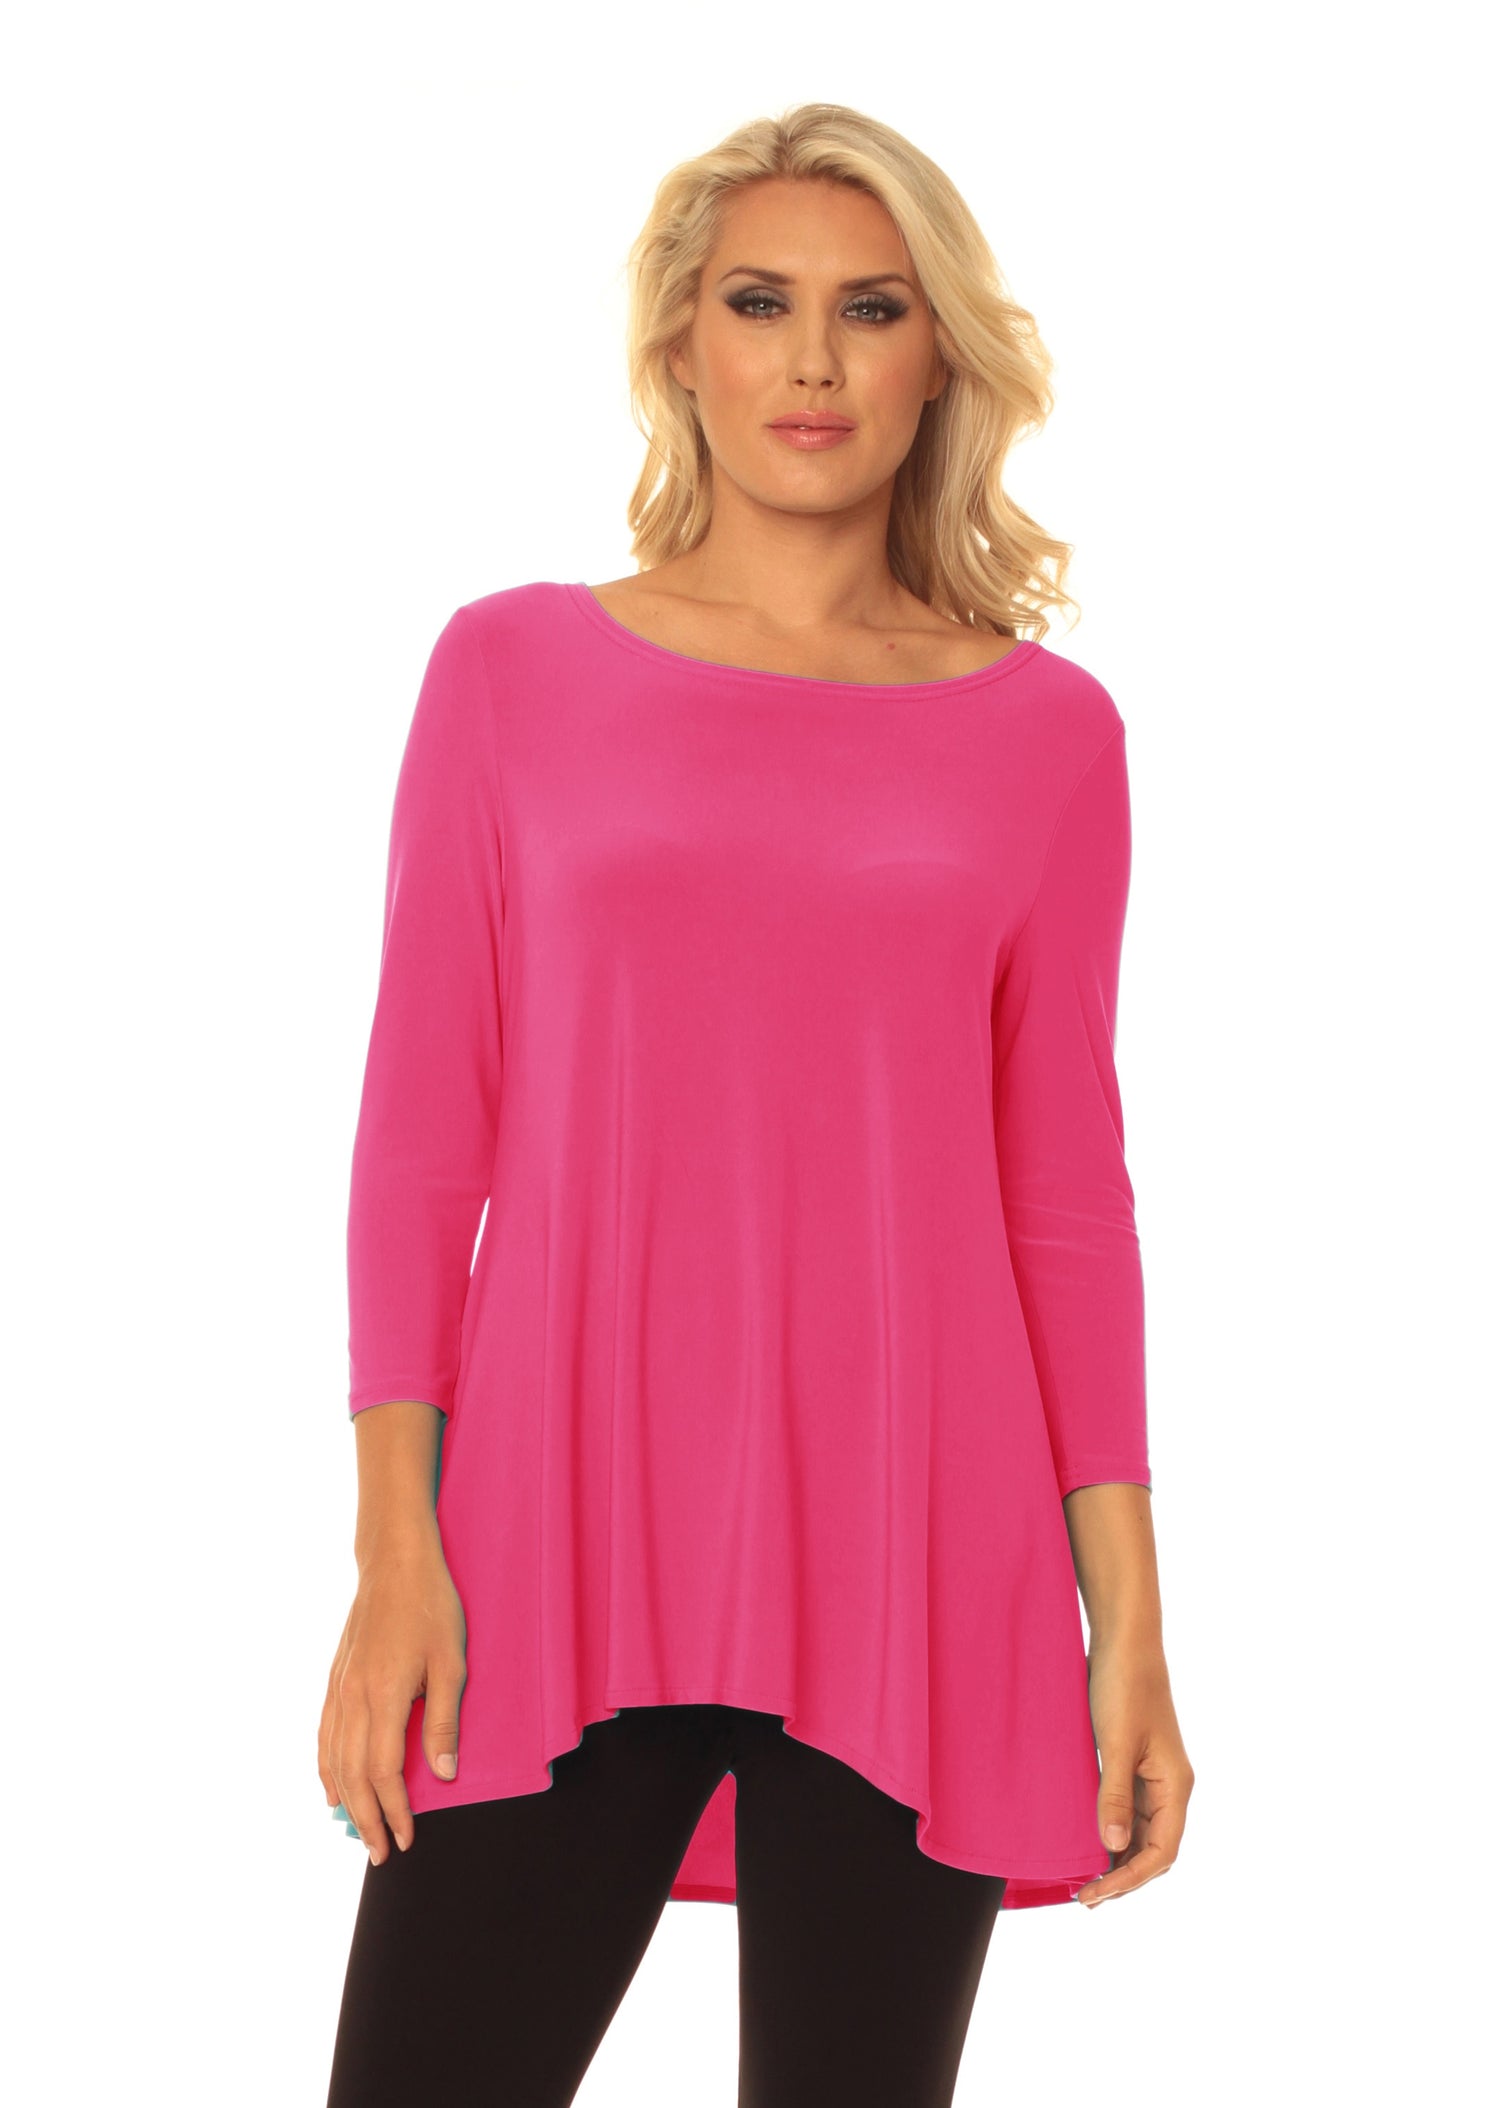 Long Tunic Tops To Wear Over Leggings